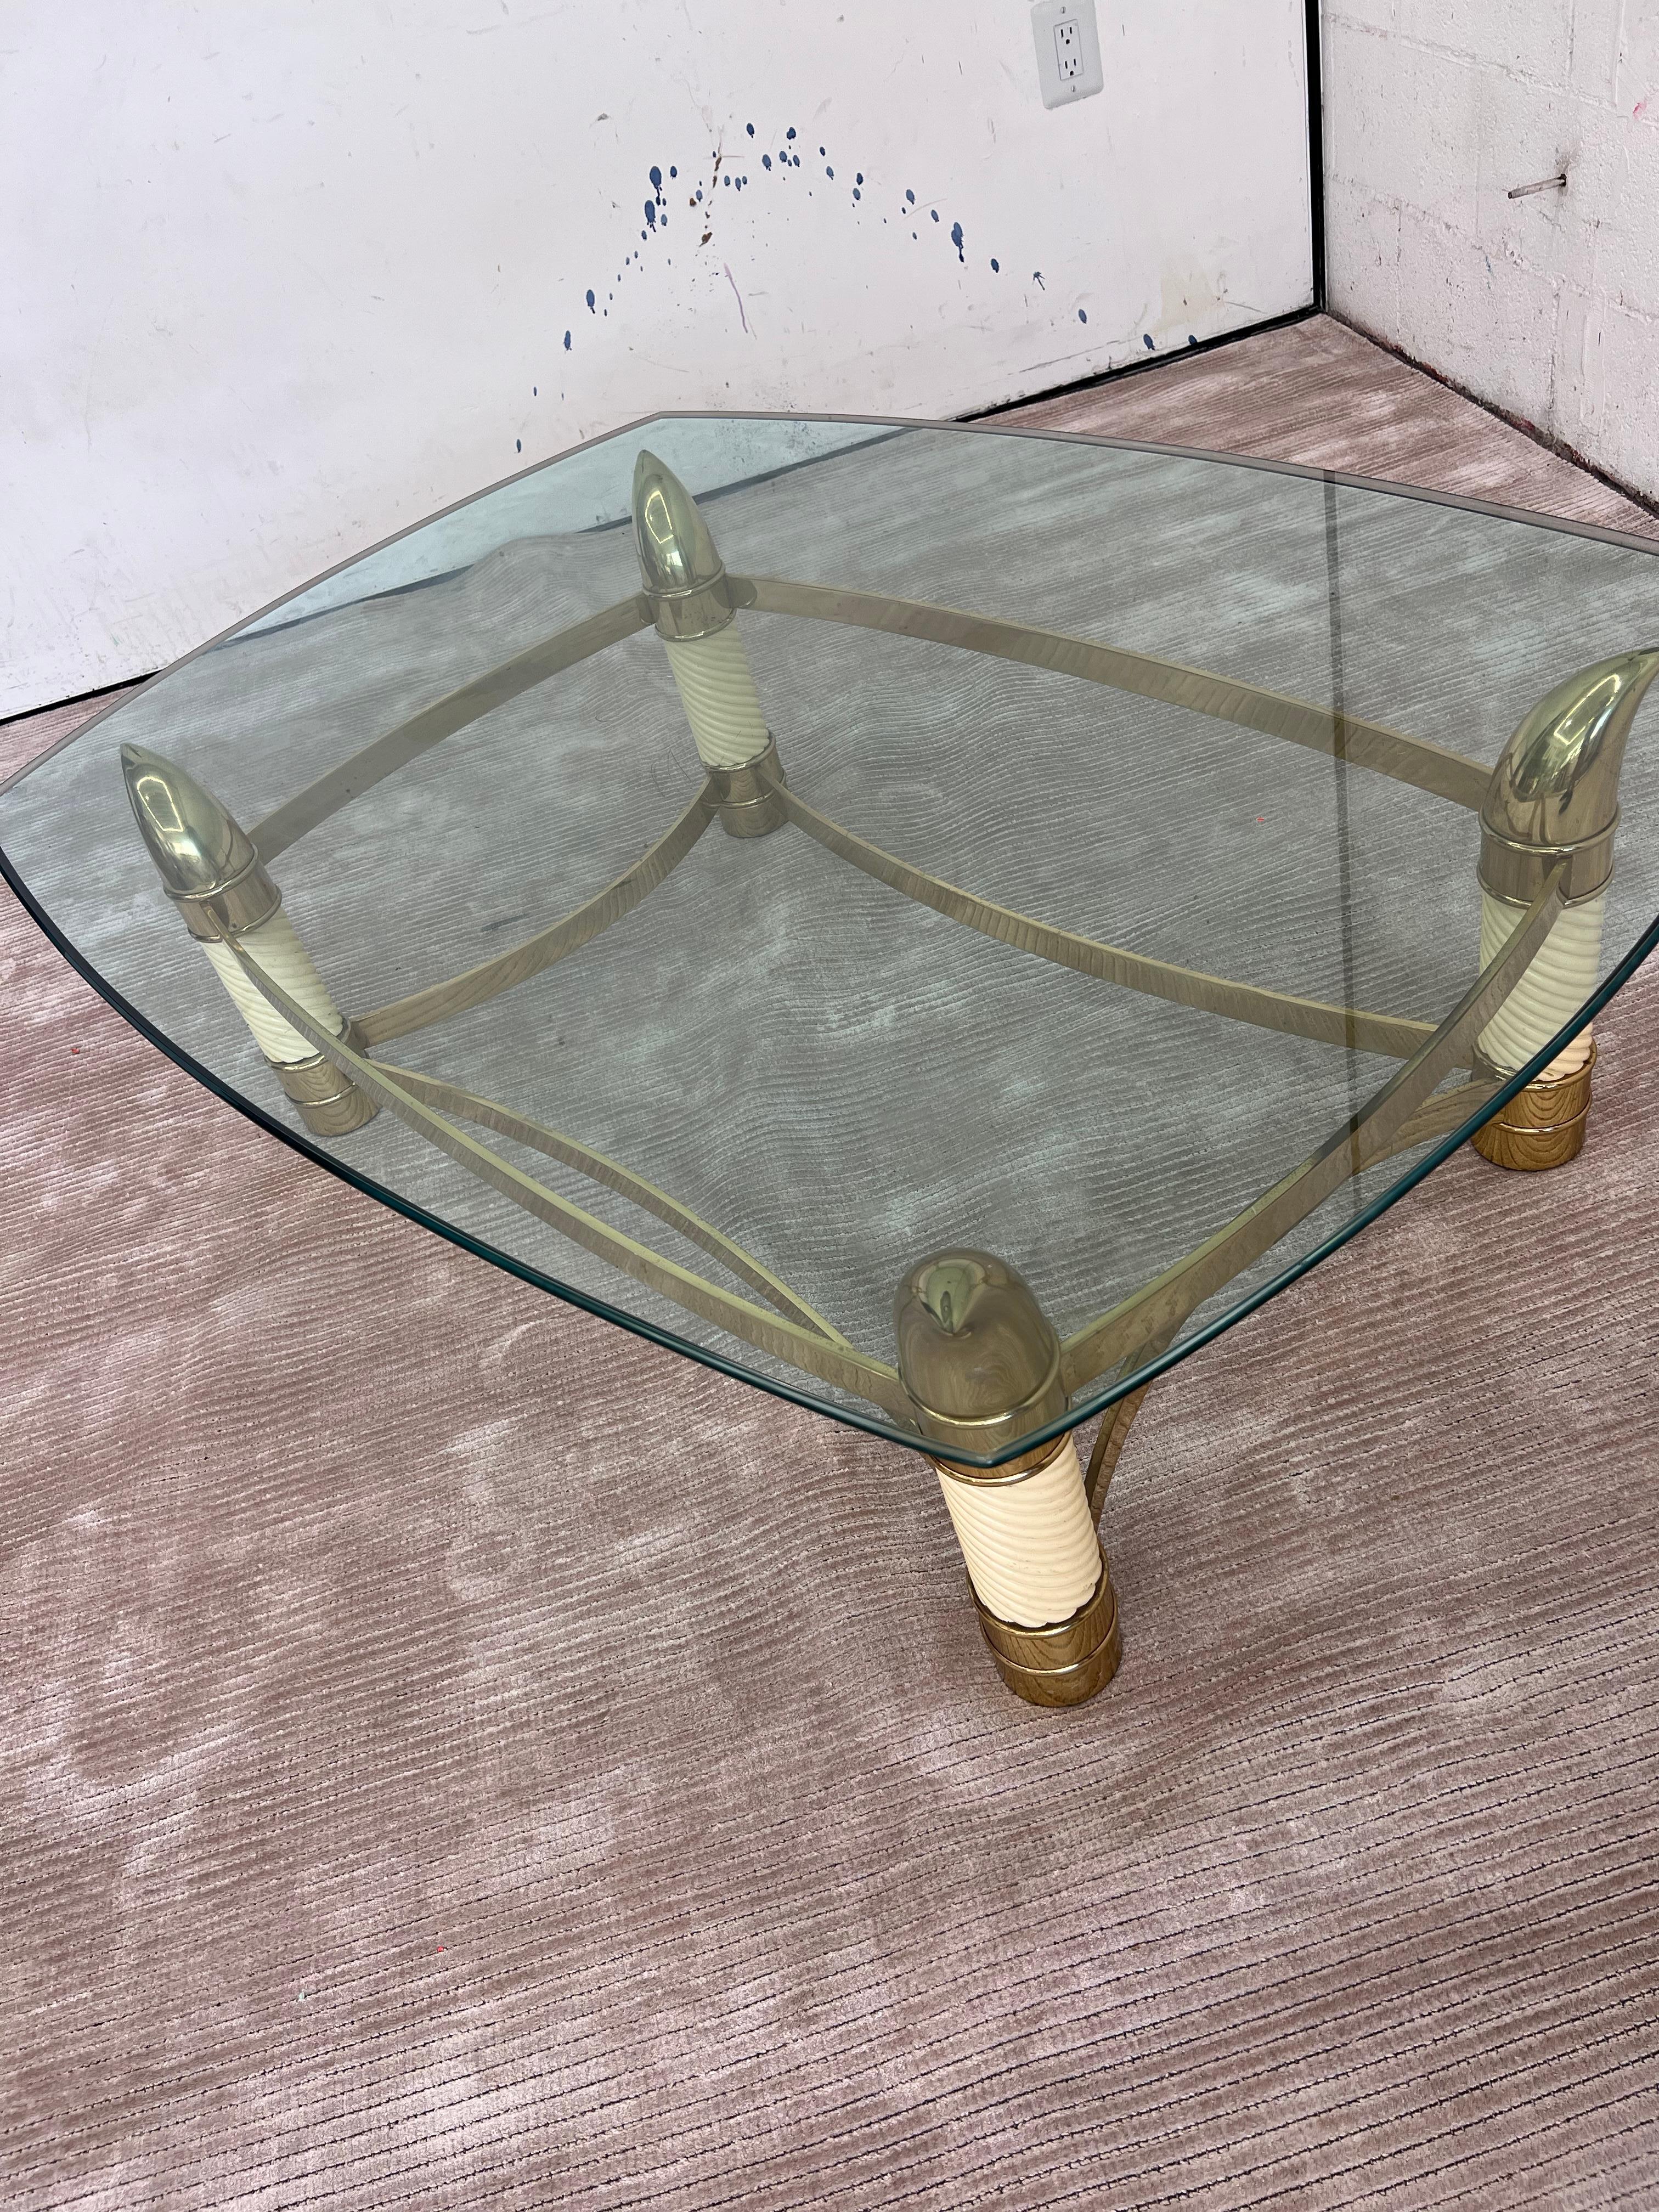 Elegant solid brass and ivory lacquer table with rounded corner beveled glass top very nicely crafted with faux ivory and brass tusks, styled after Tommaso Barbi’s incredible line of ceramic sculptural works, of high-end build and design, circa